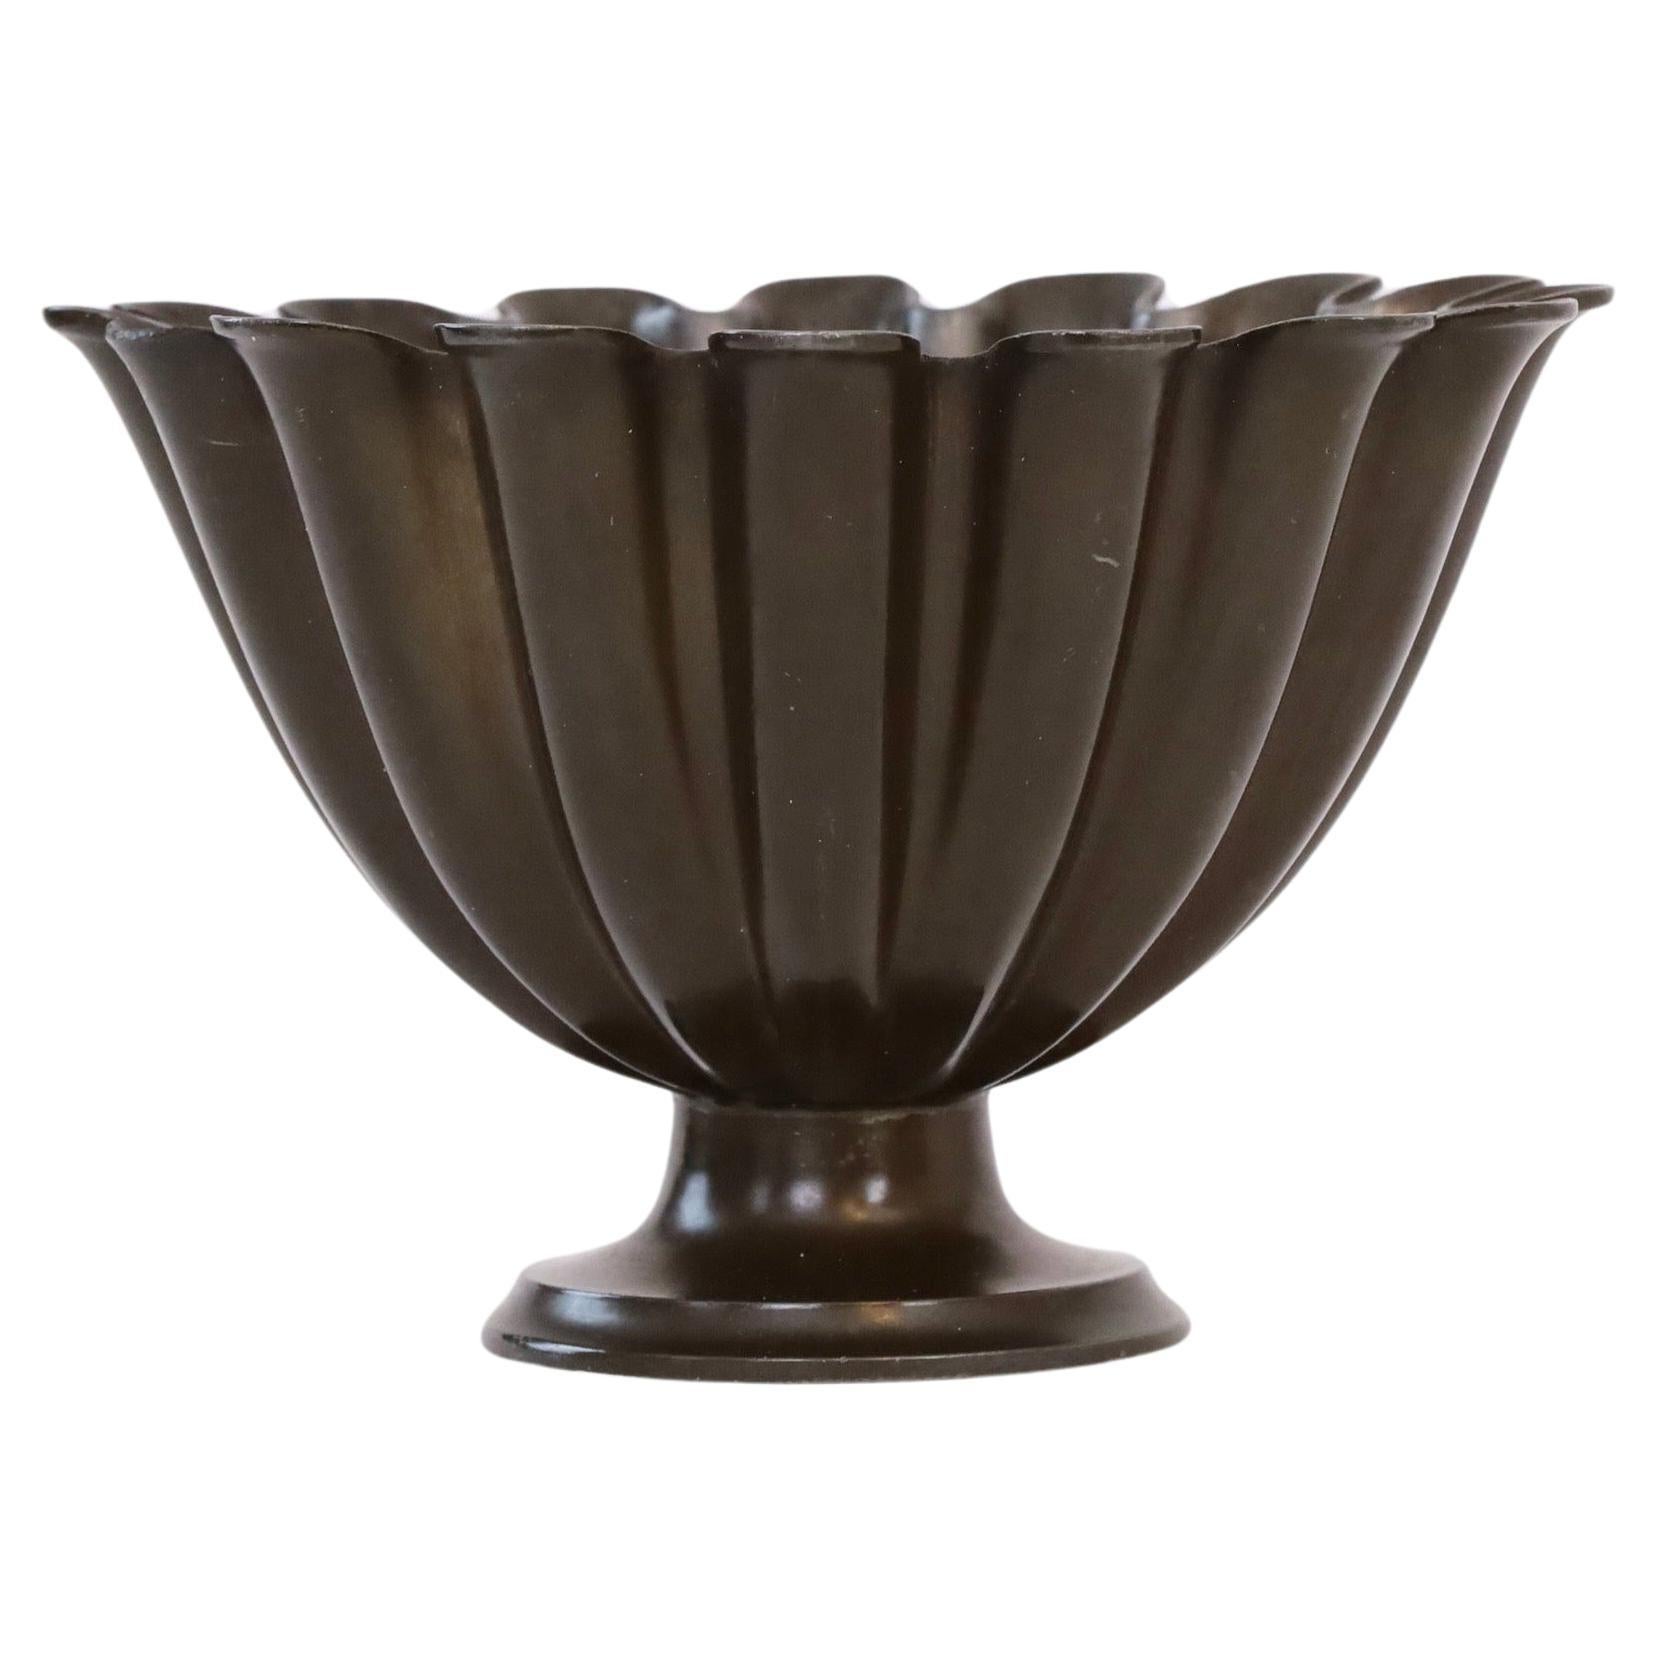 Scalloped pedestal discometal bowl by Just Andersen 1920s, Denmark